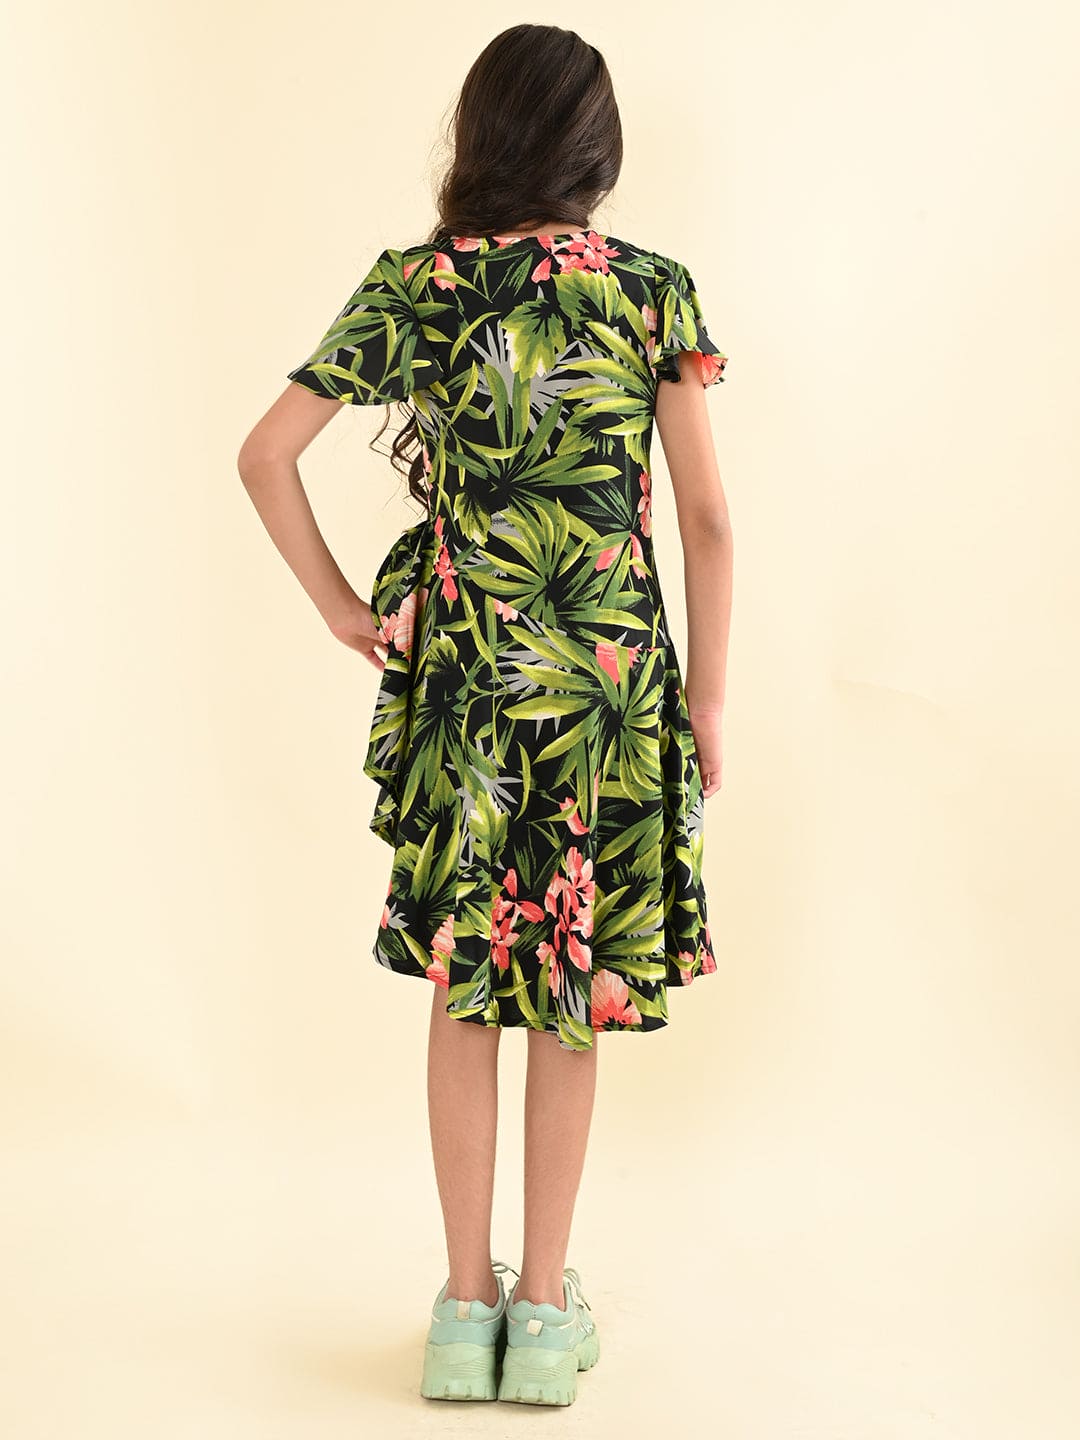 Tropical printed fit and flare dress.